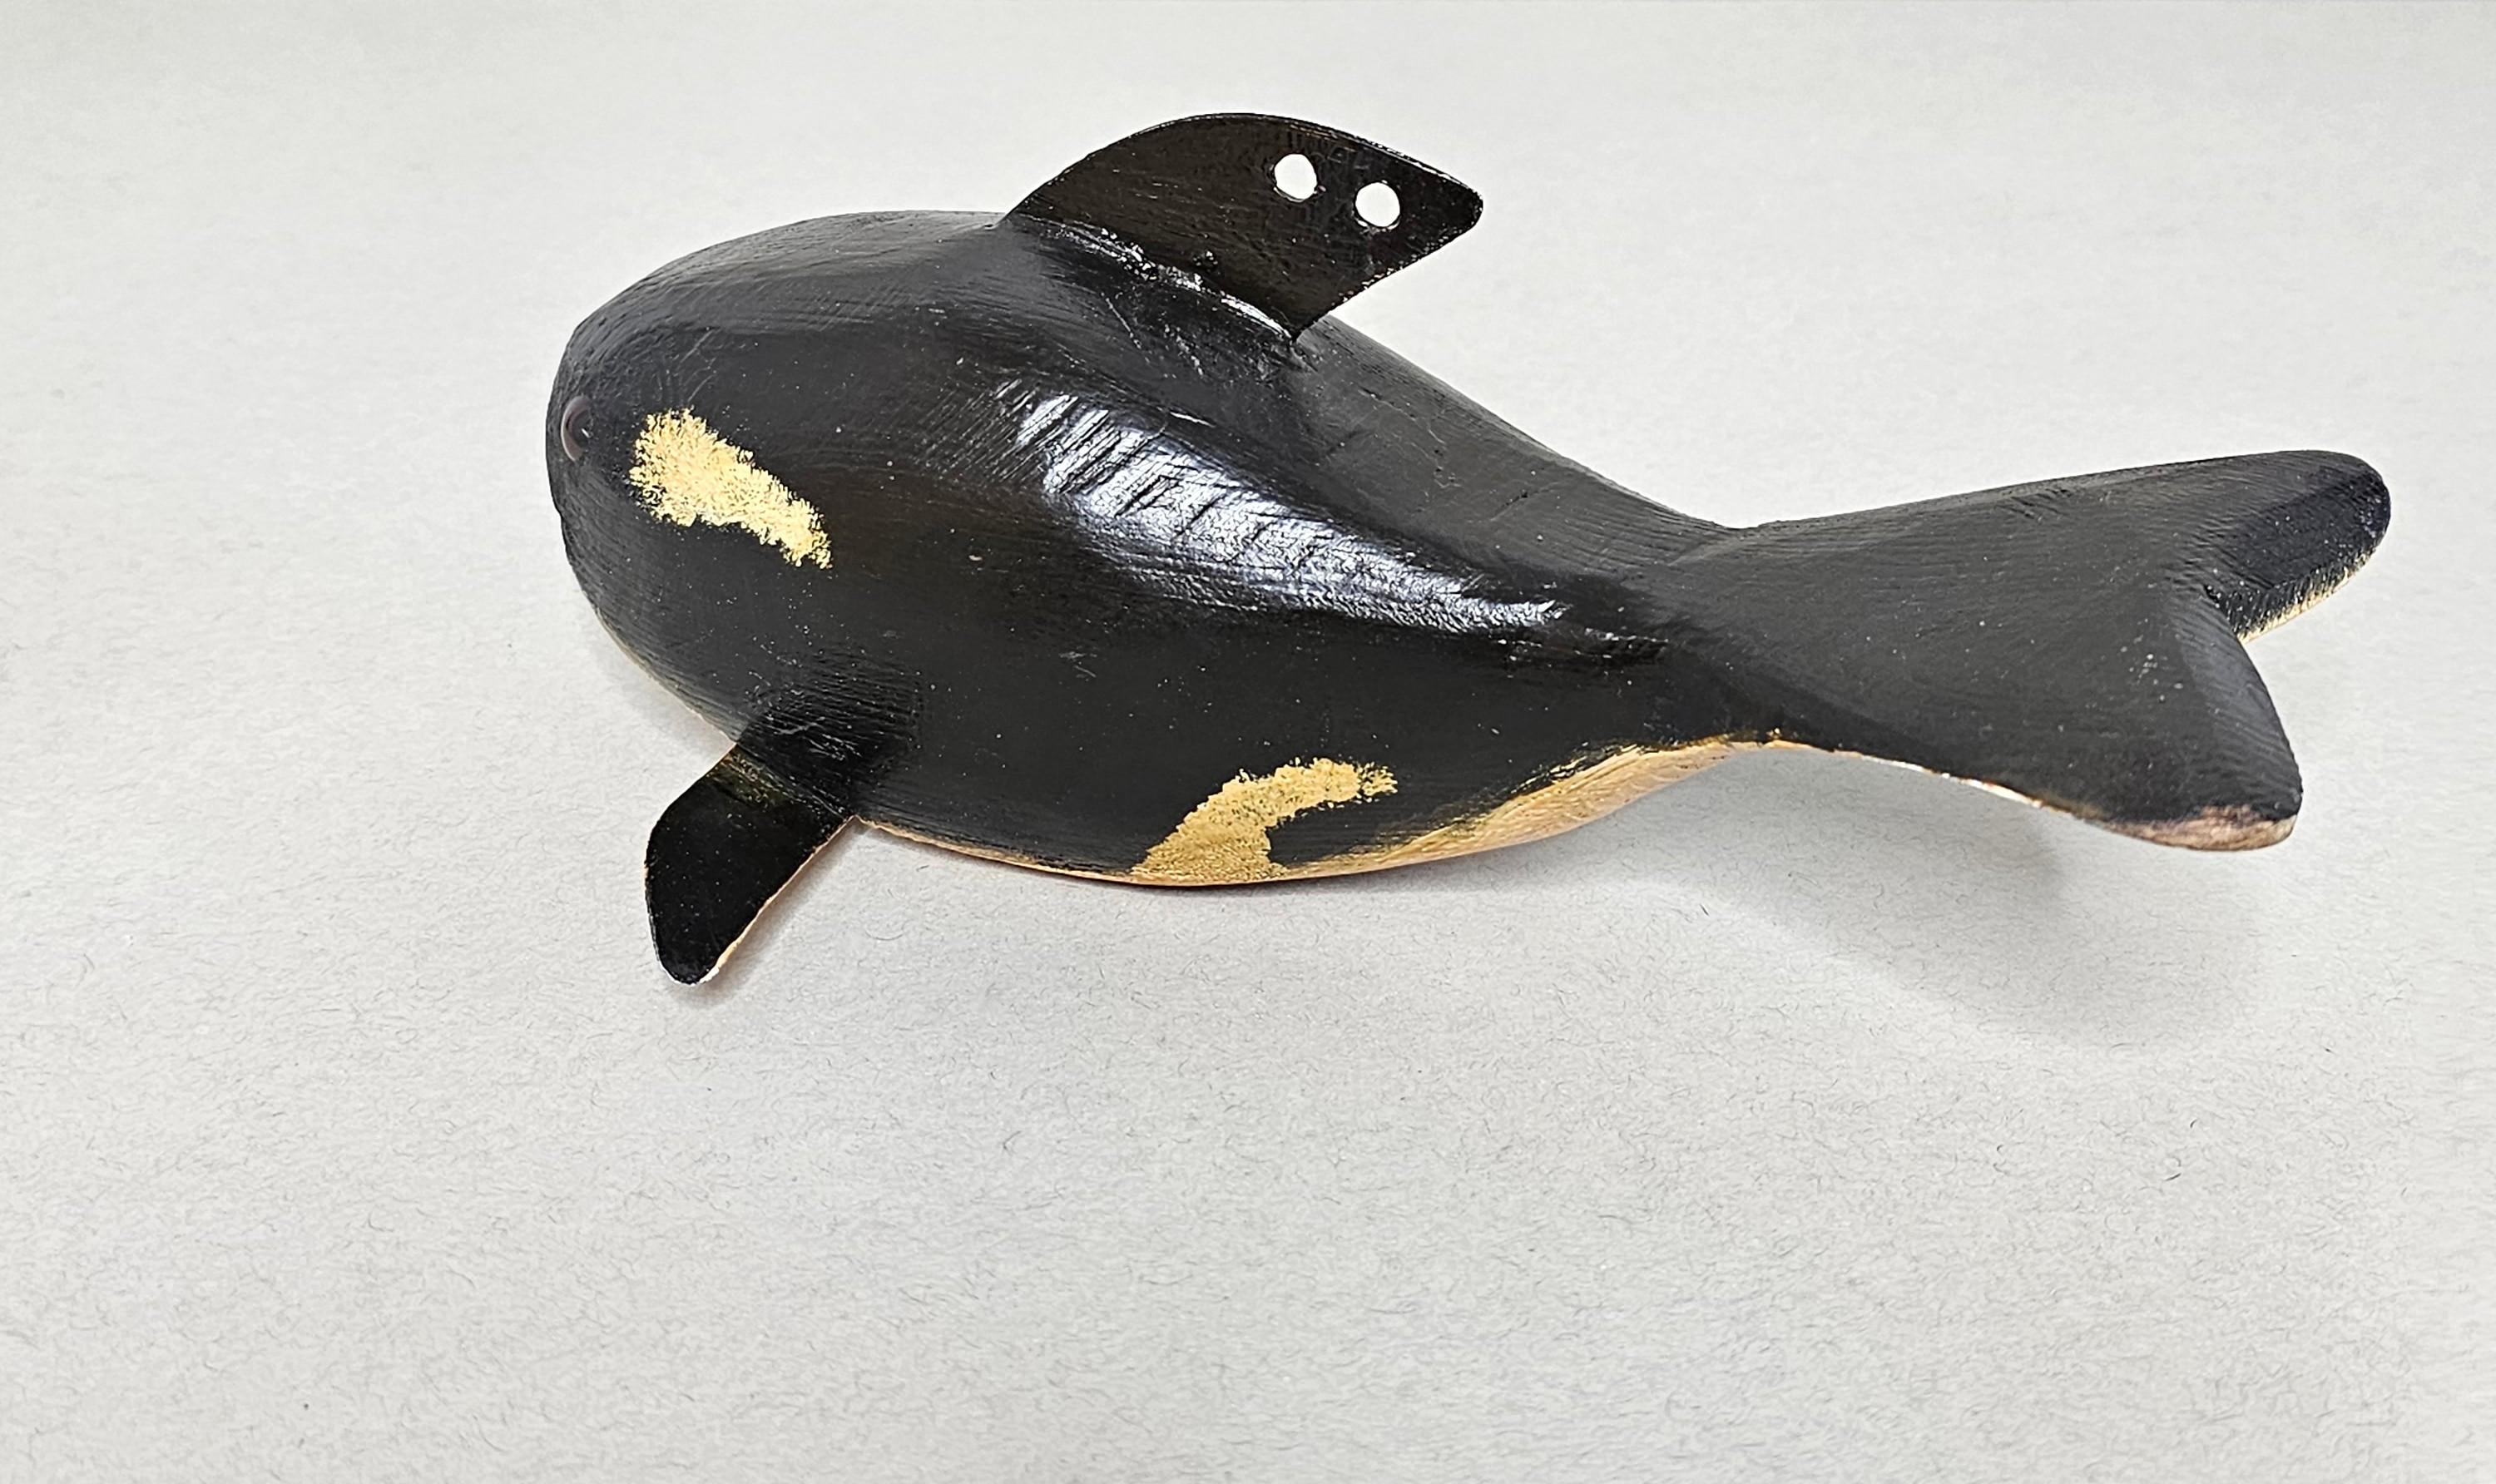 Duluth Fish Decoy American Folk Art Carved Painted Orca Killer Whale Sculpture For Sale 1